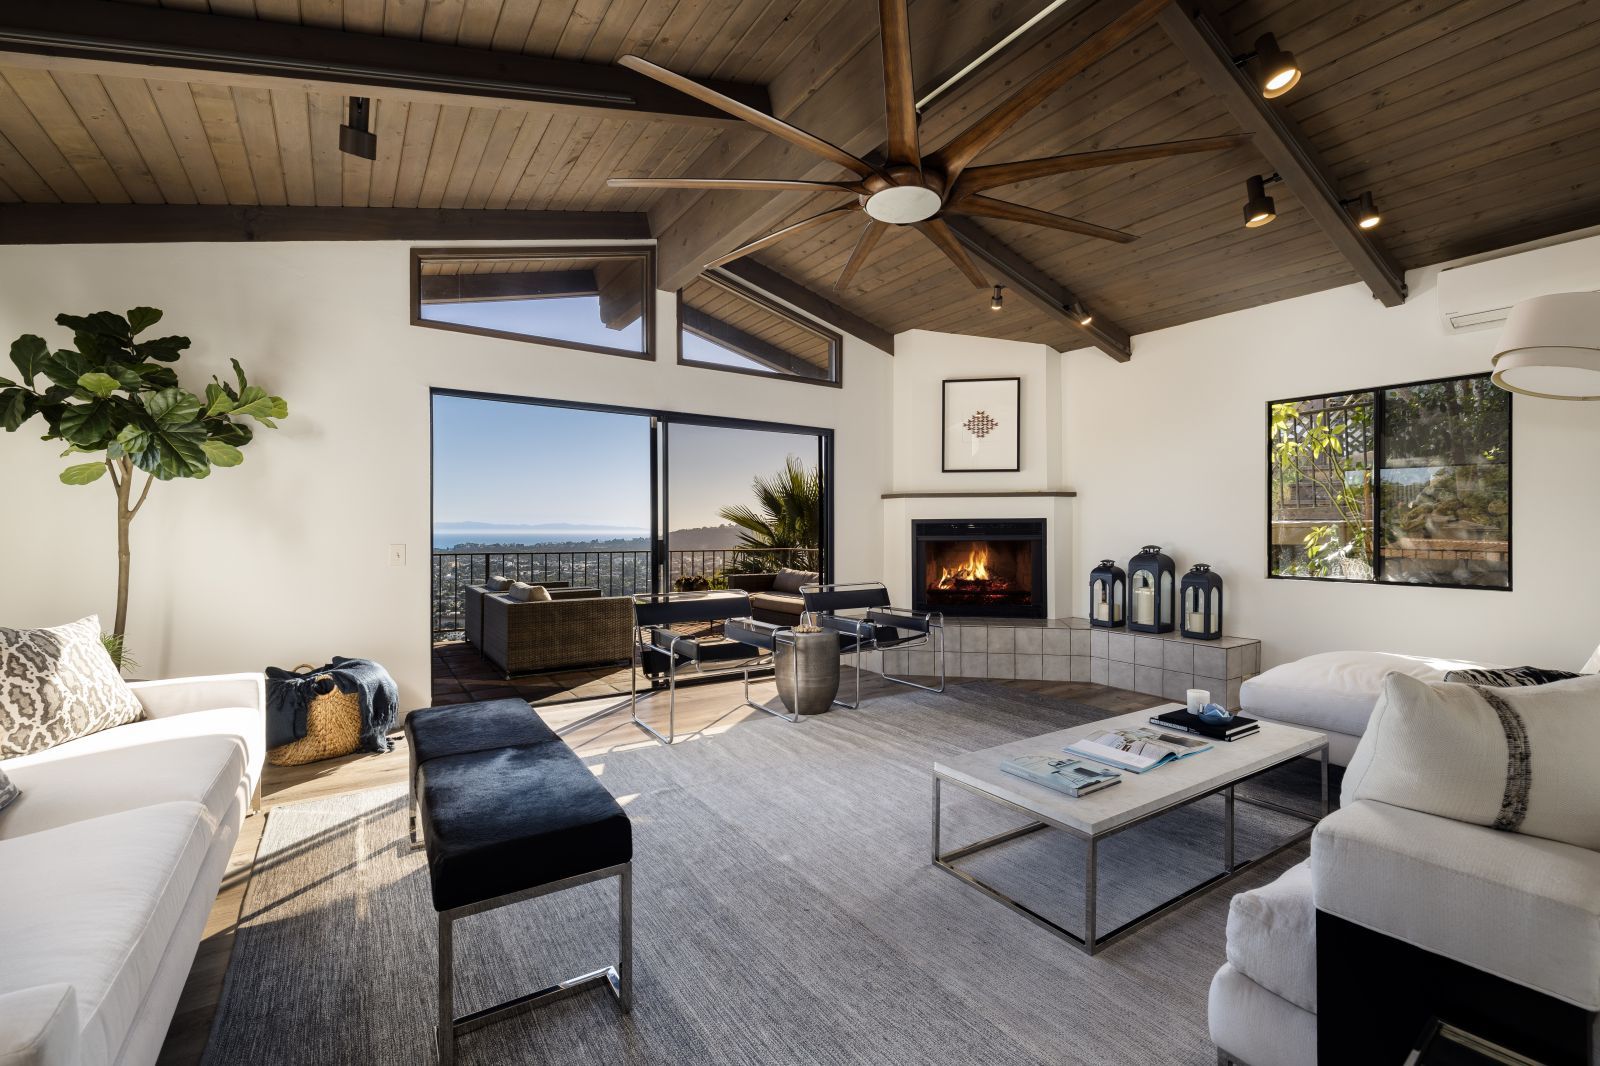 The living room fo a Santa Barbara home for sale with a fireplace and ocean view.